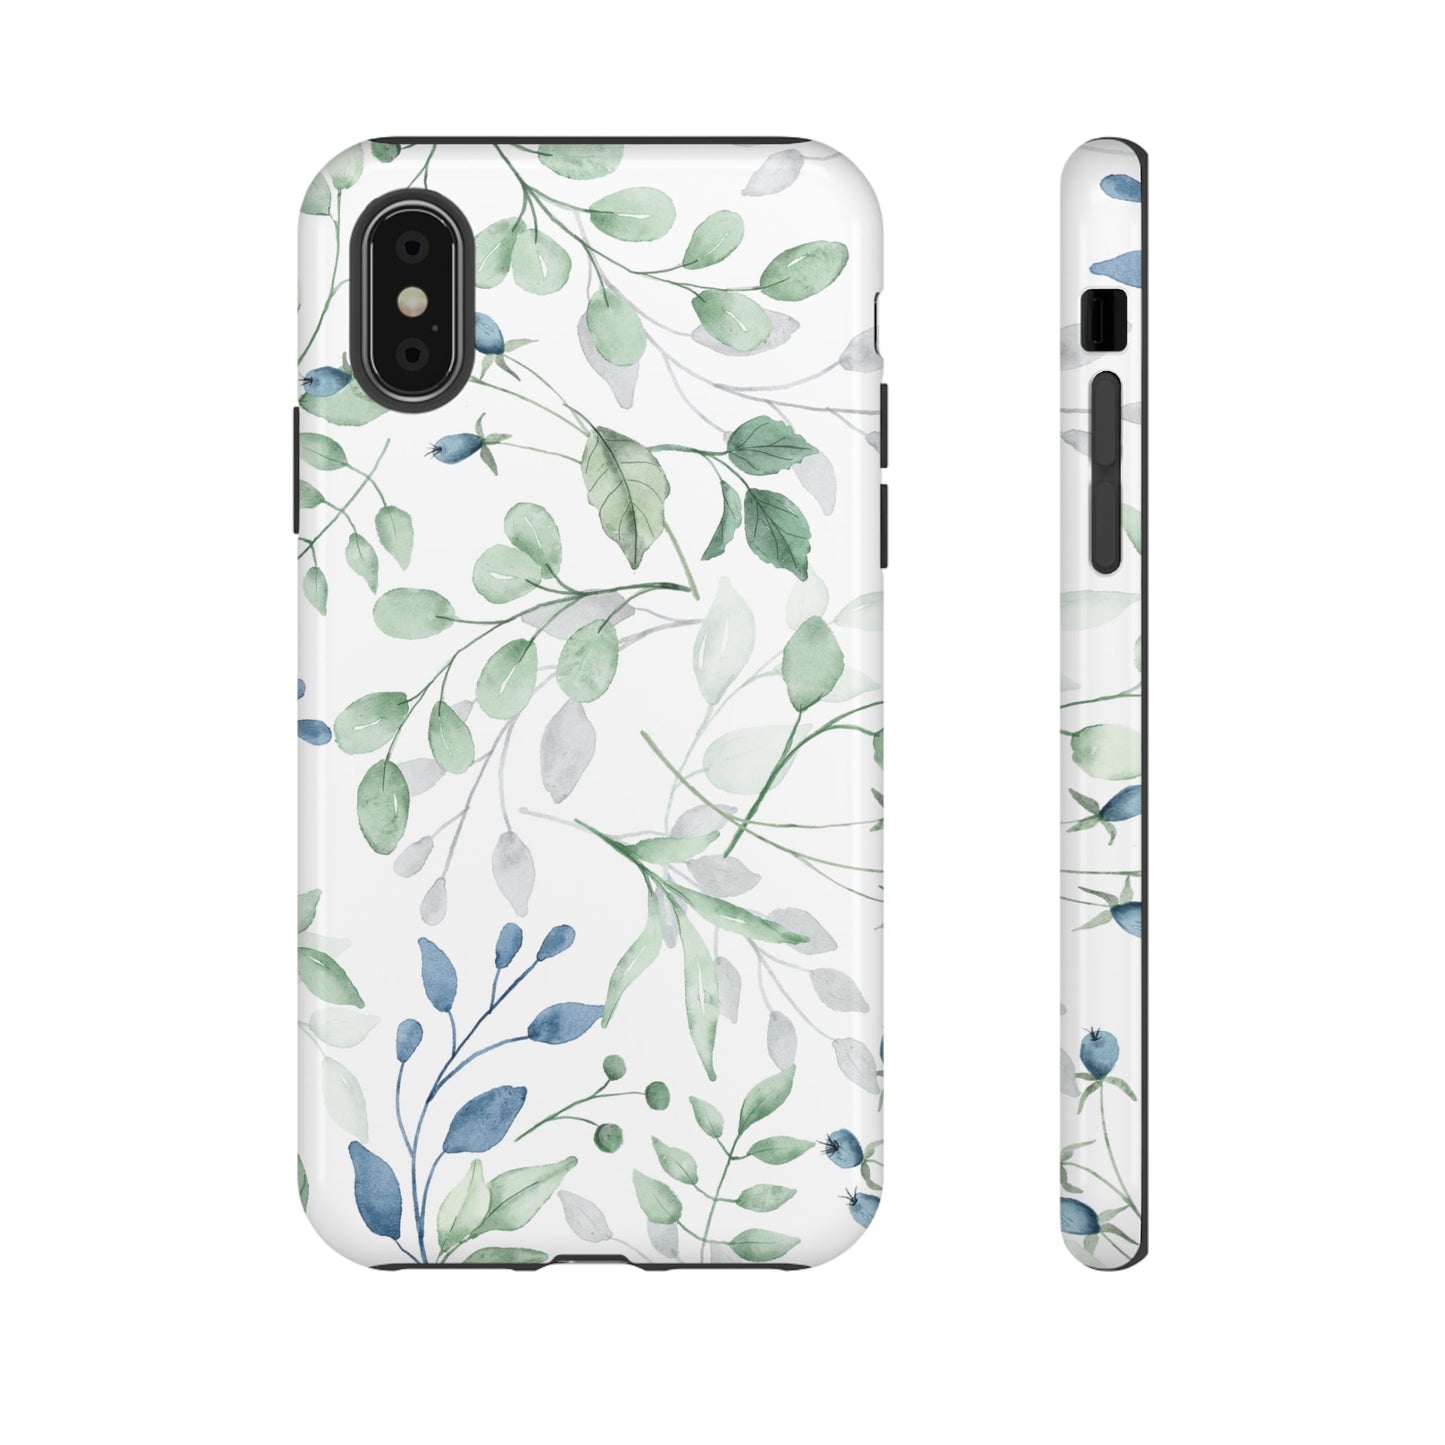 Botanical Phone case fits devices iPhone Samsung Galaxy Google Pixel - Cheerful Lane